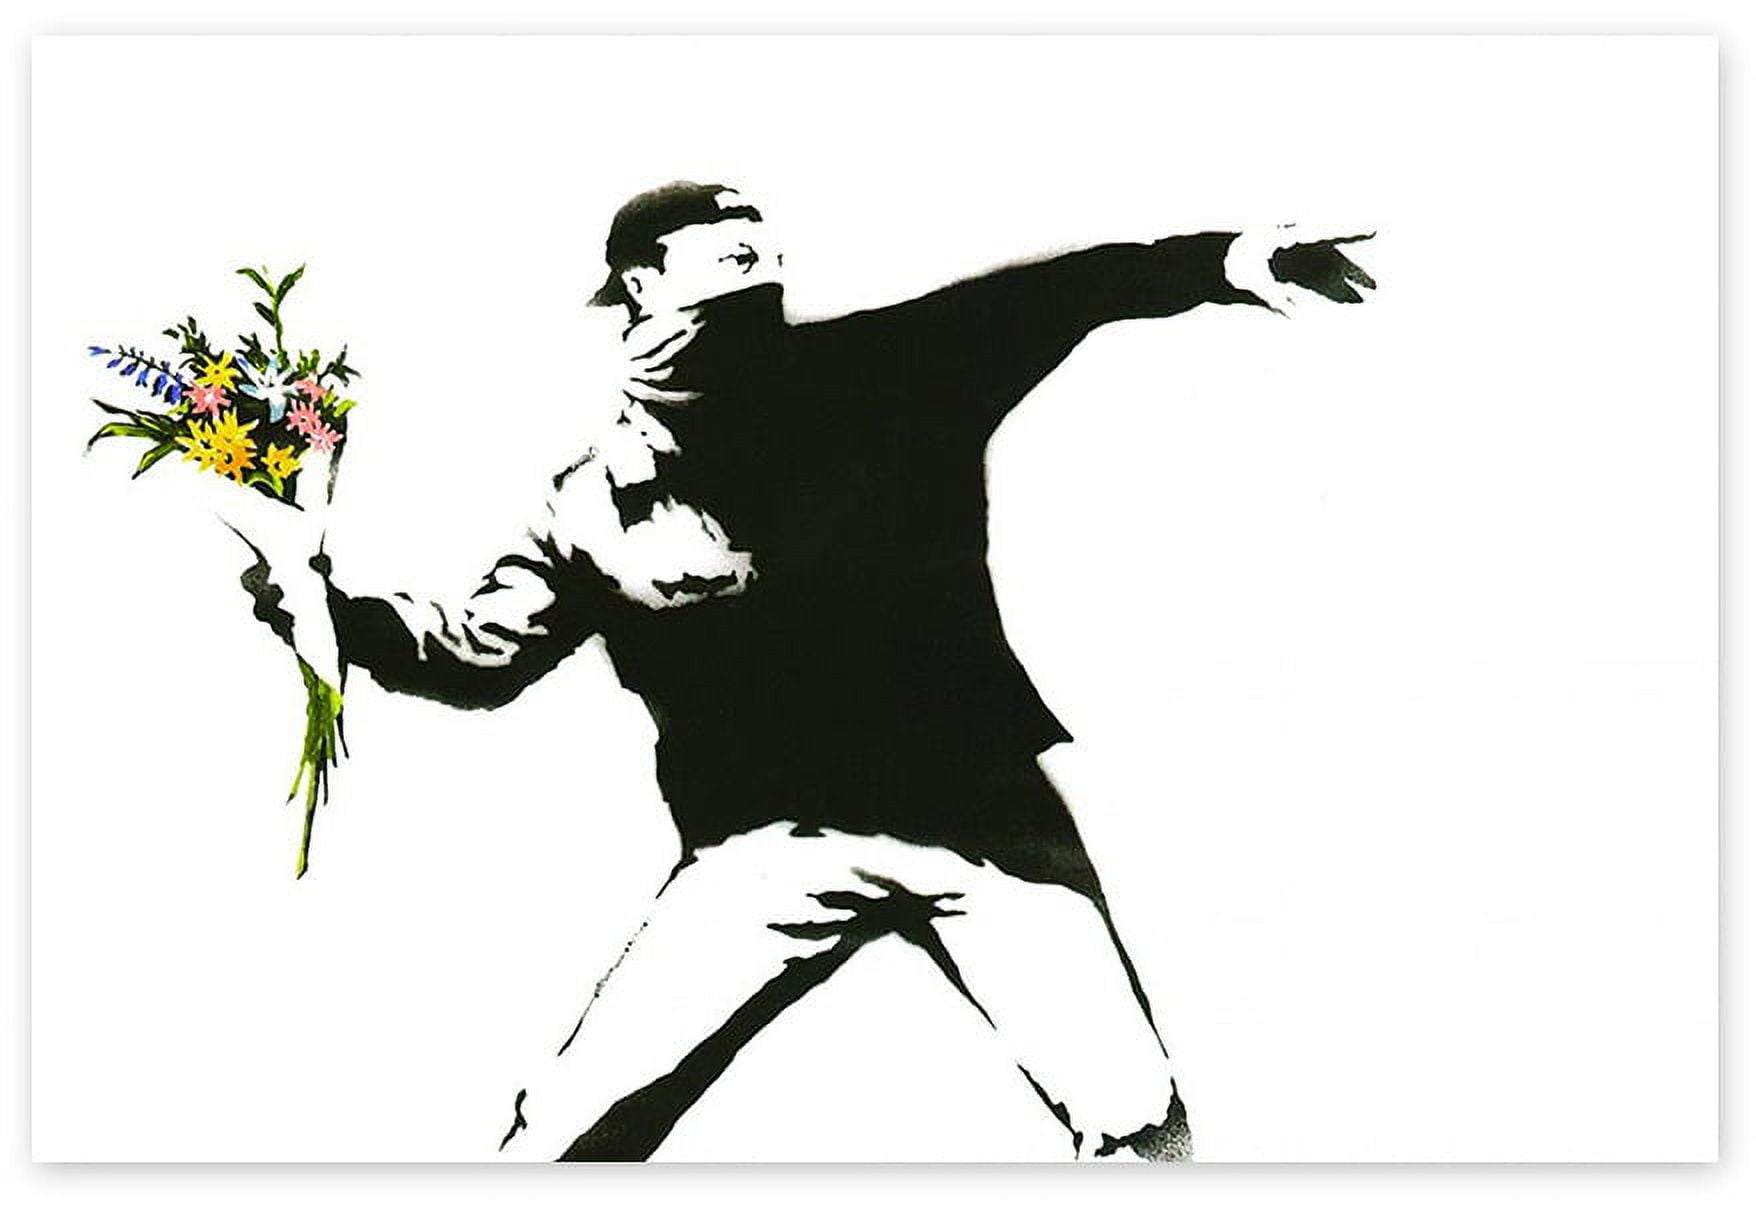 Pyramid America Street Art Poster - Banksy Flowers On Film - 11 x 17 Poster  Print Wall Art, Ideal for Bedroom Decor, Home Decor, Office Decor